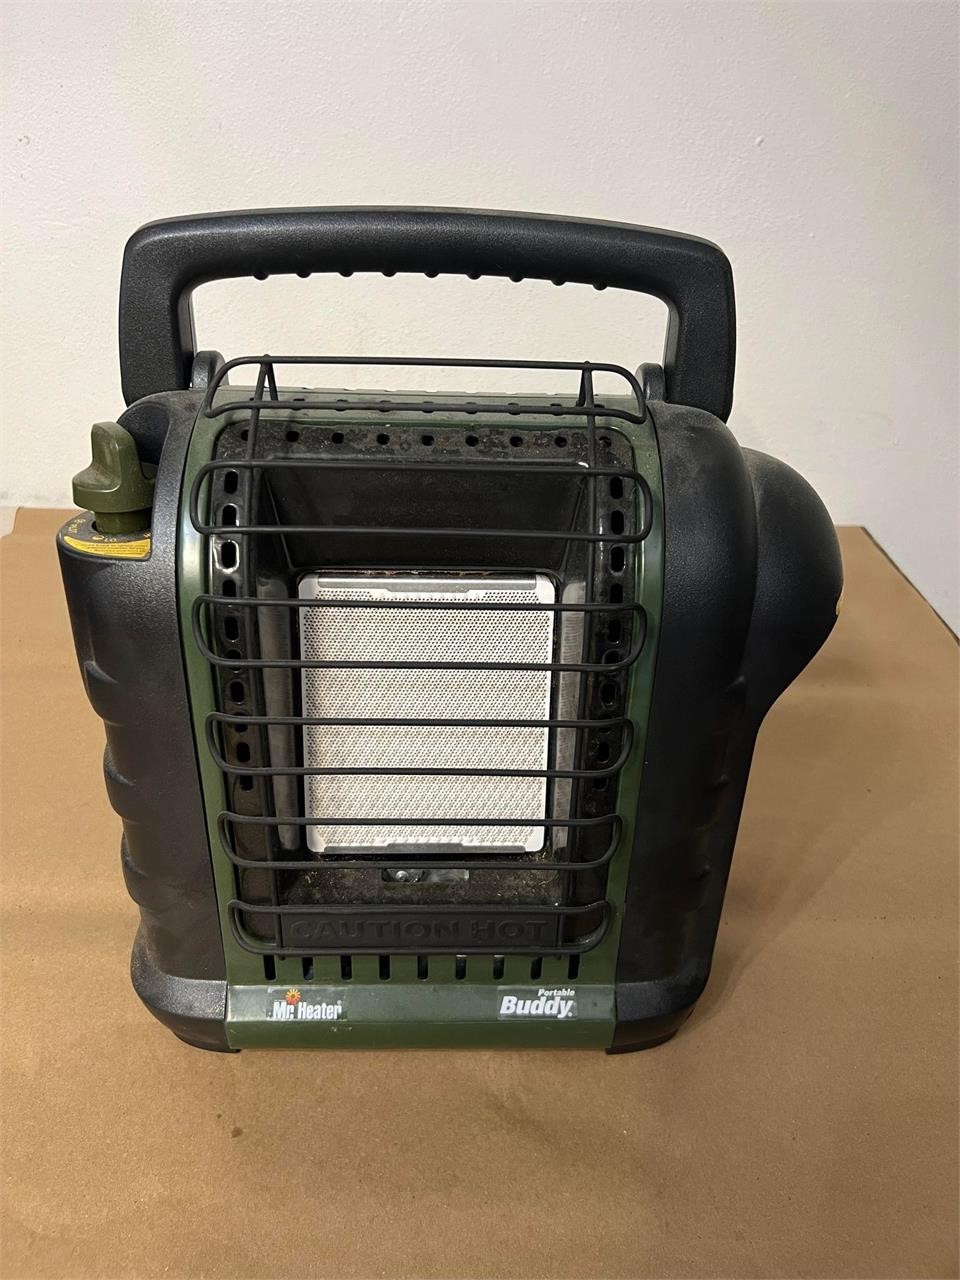 BUDDY HEATER TESTED AND WORKING